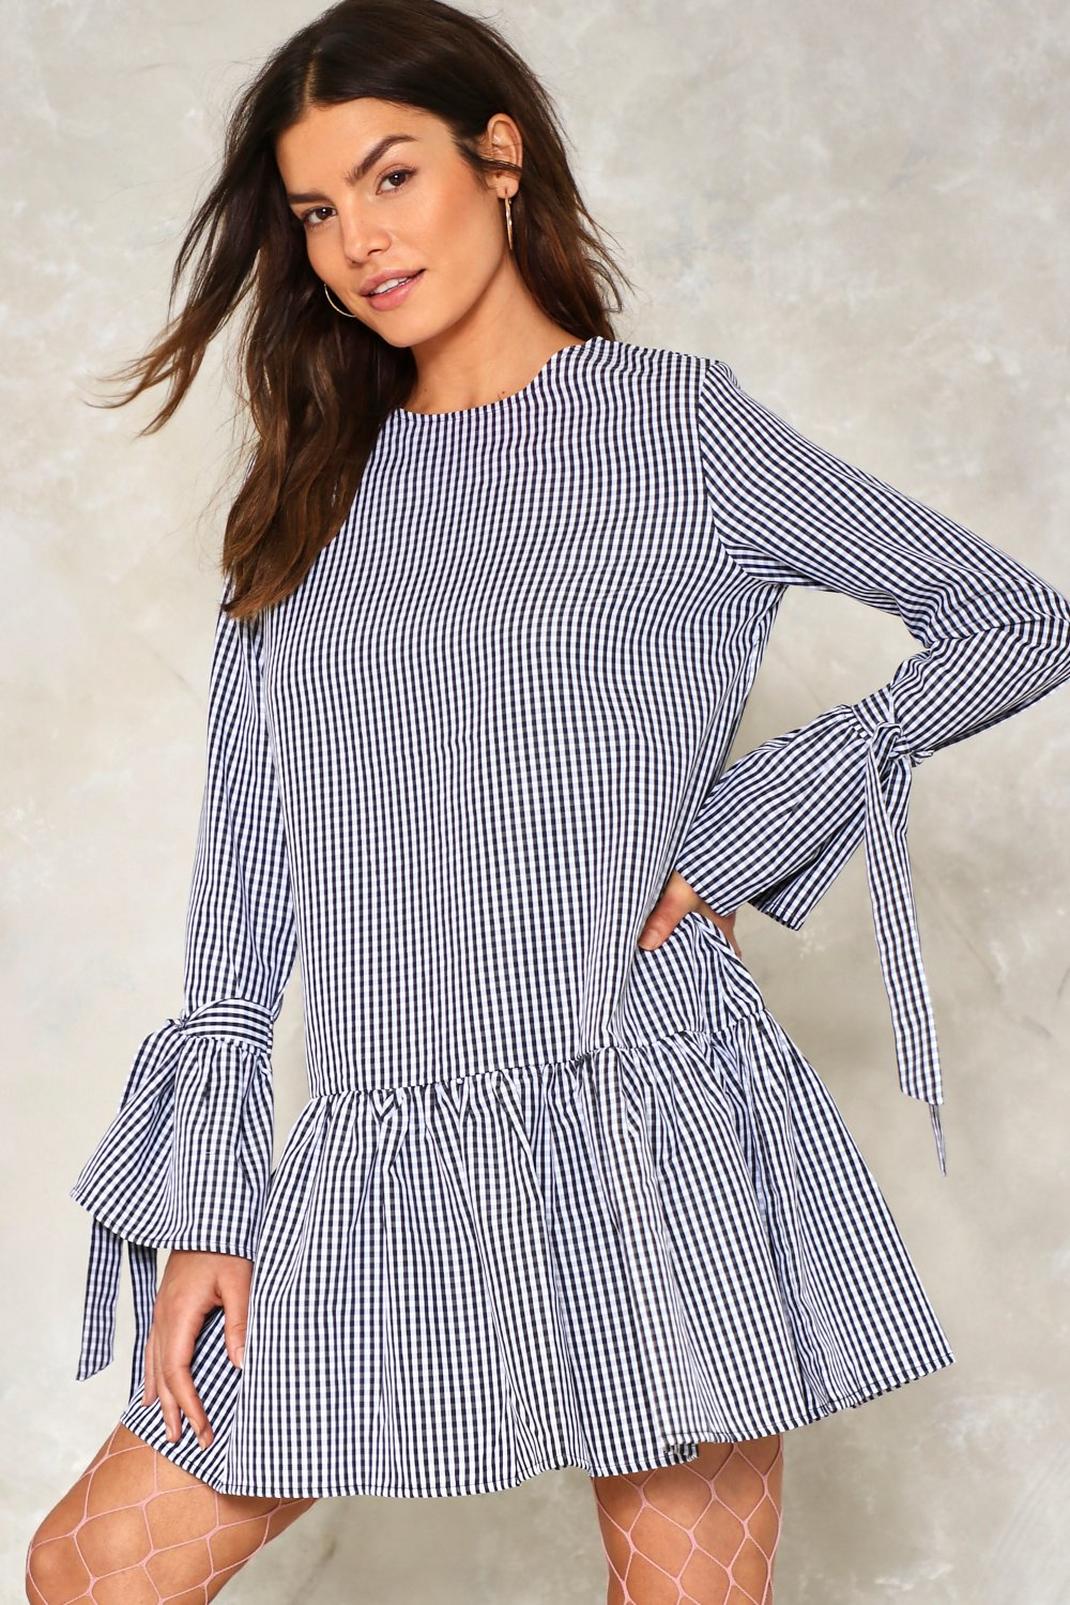 Square One Gingham Dress image number 1